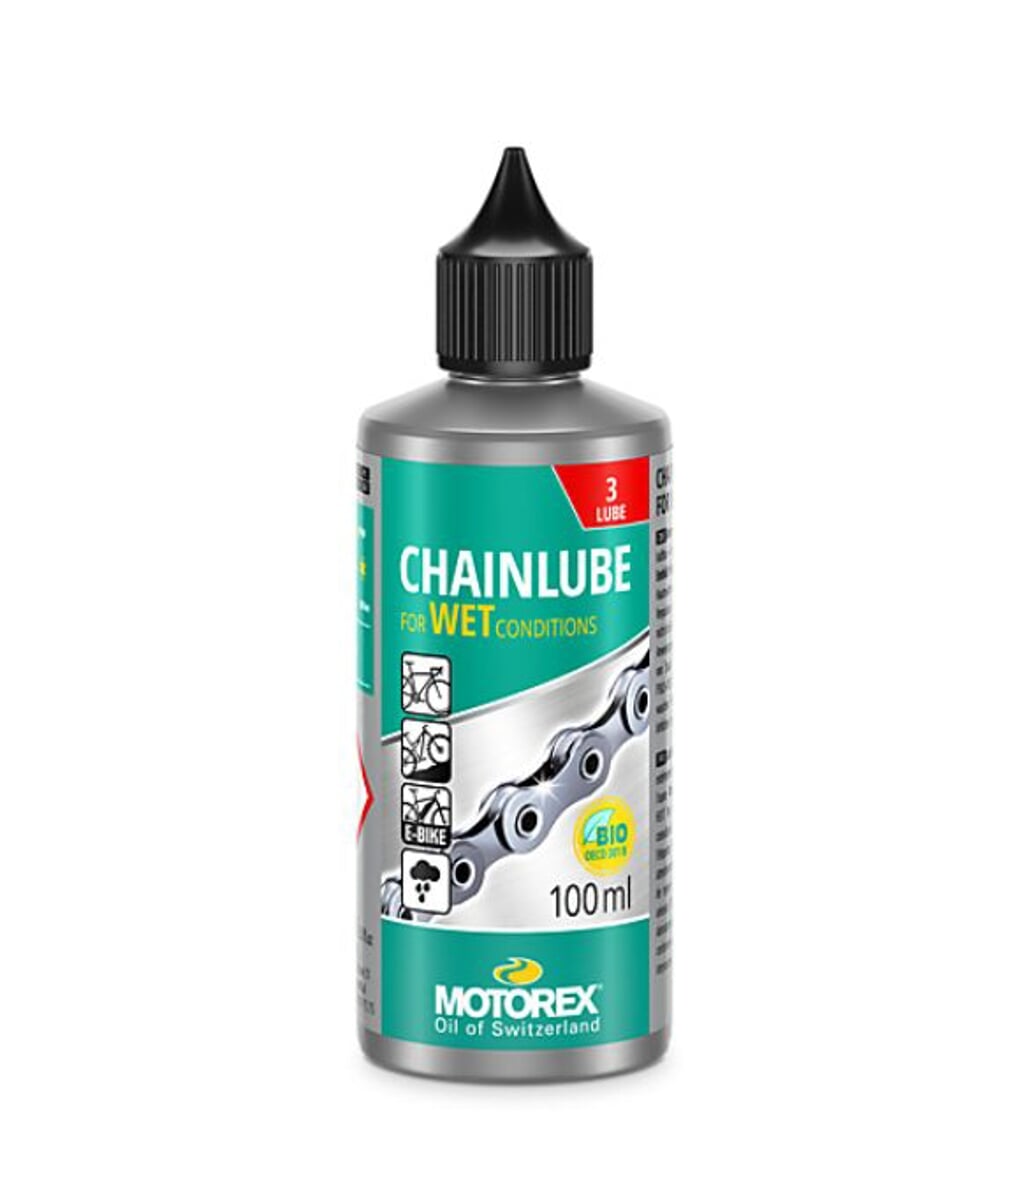 MOTOREX CHAIN LUBE FOR WET CONDITIONS 100ML K12 OLEJ